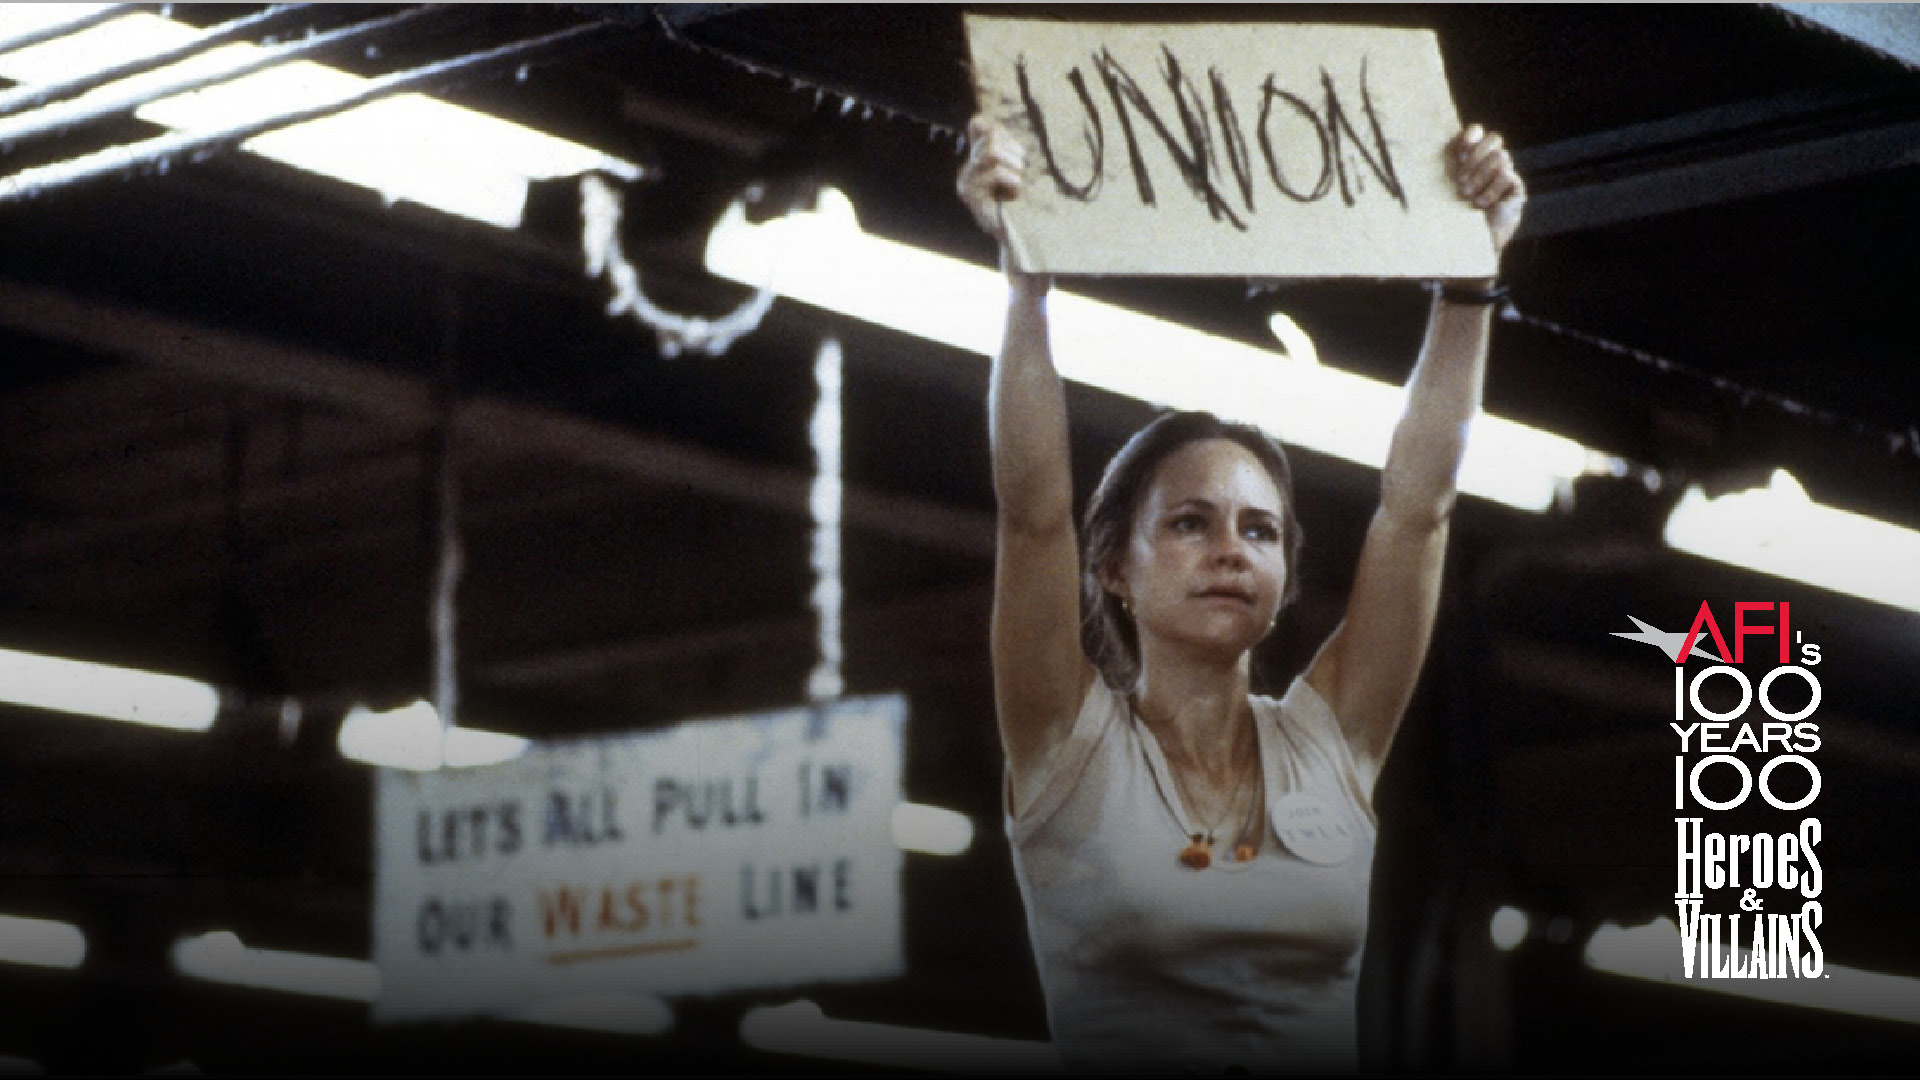 Film still of Sally Field holding up a "Union" sign in the film NORMA RAE